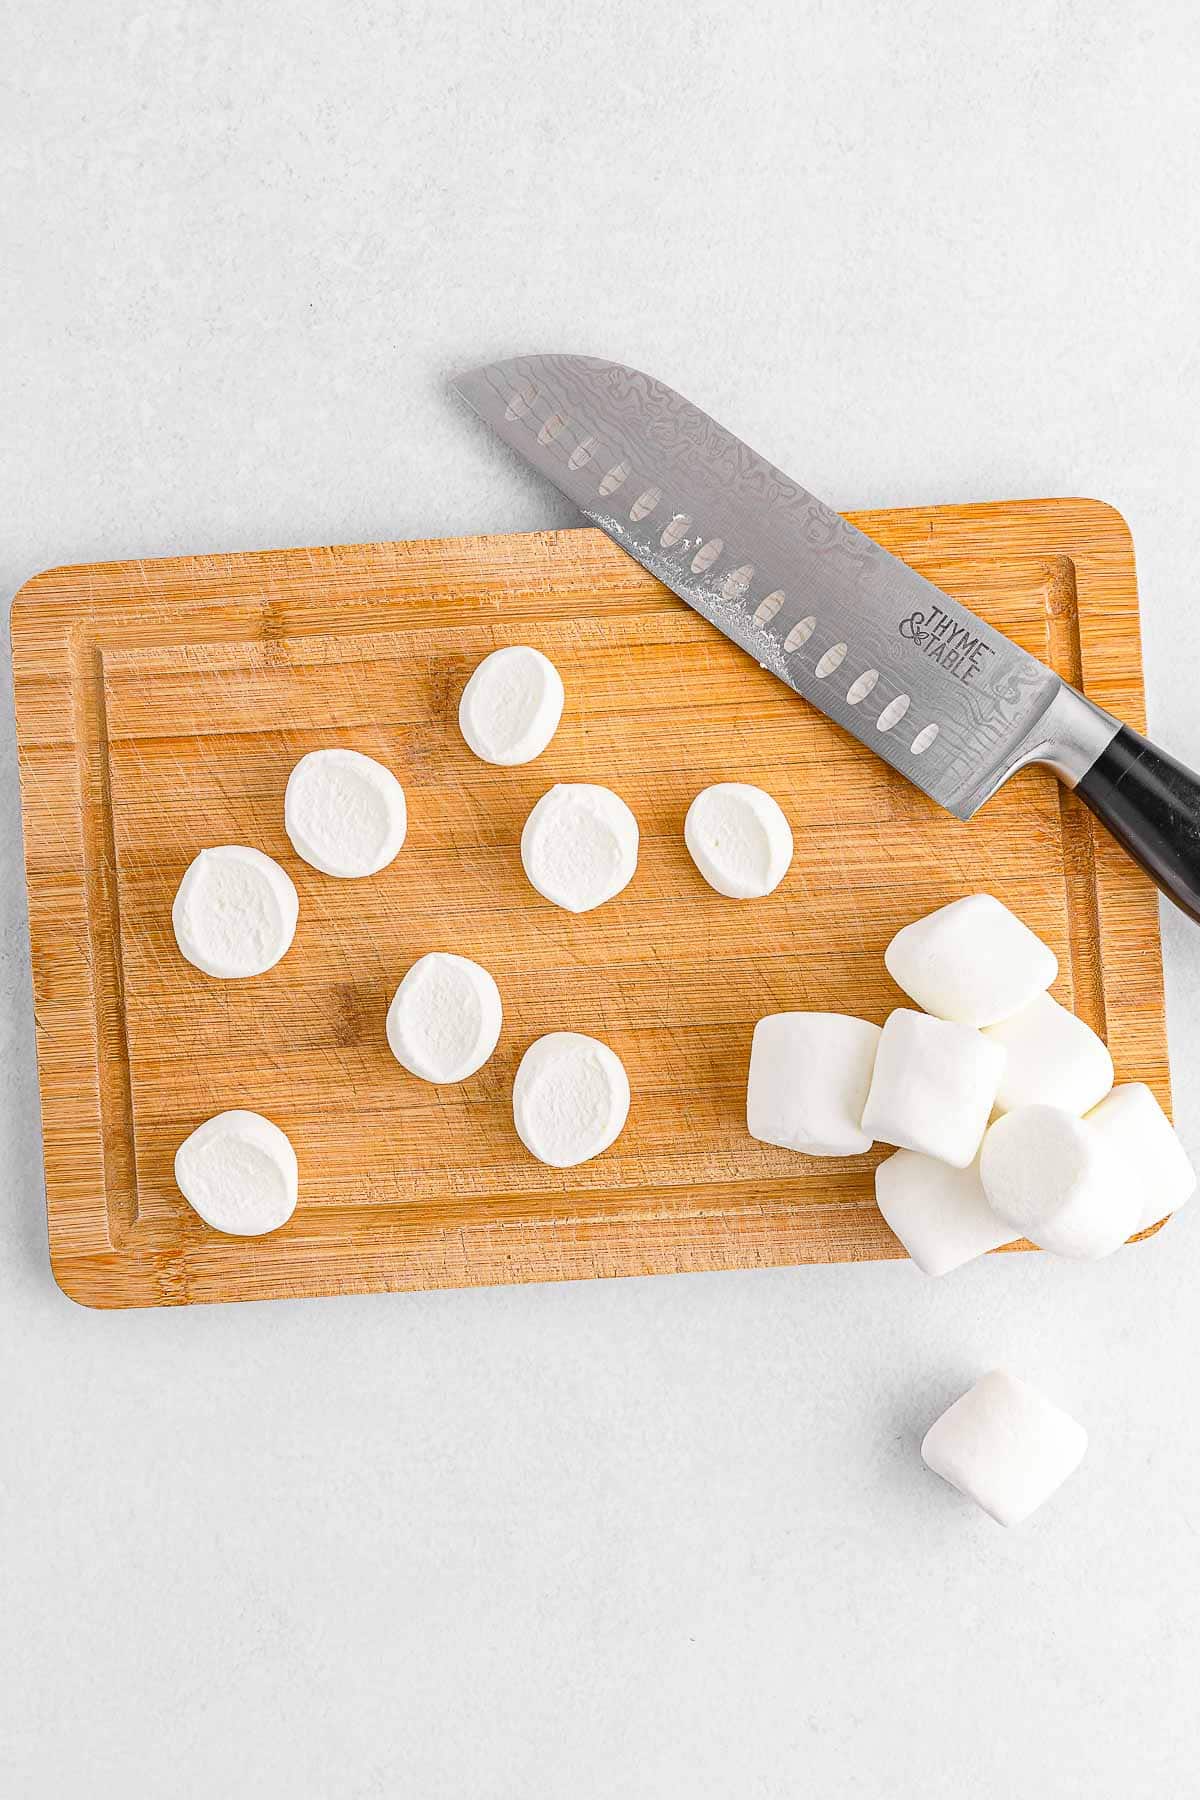 Marshmallows on cutting board being sliced in half prior to cooking in air fryer.